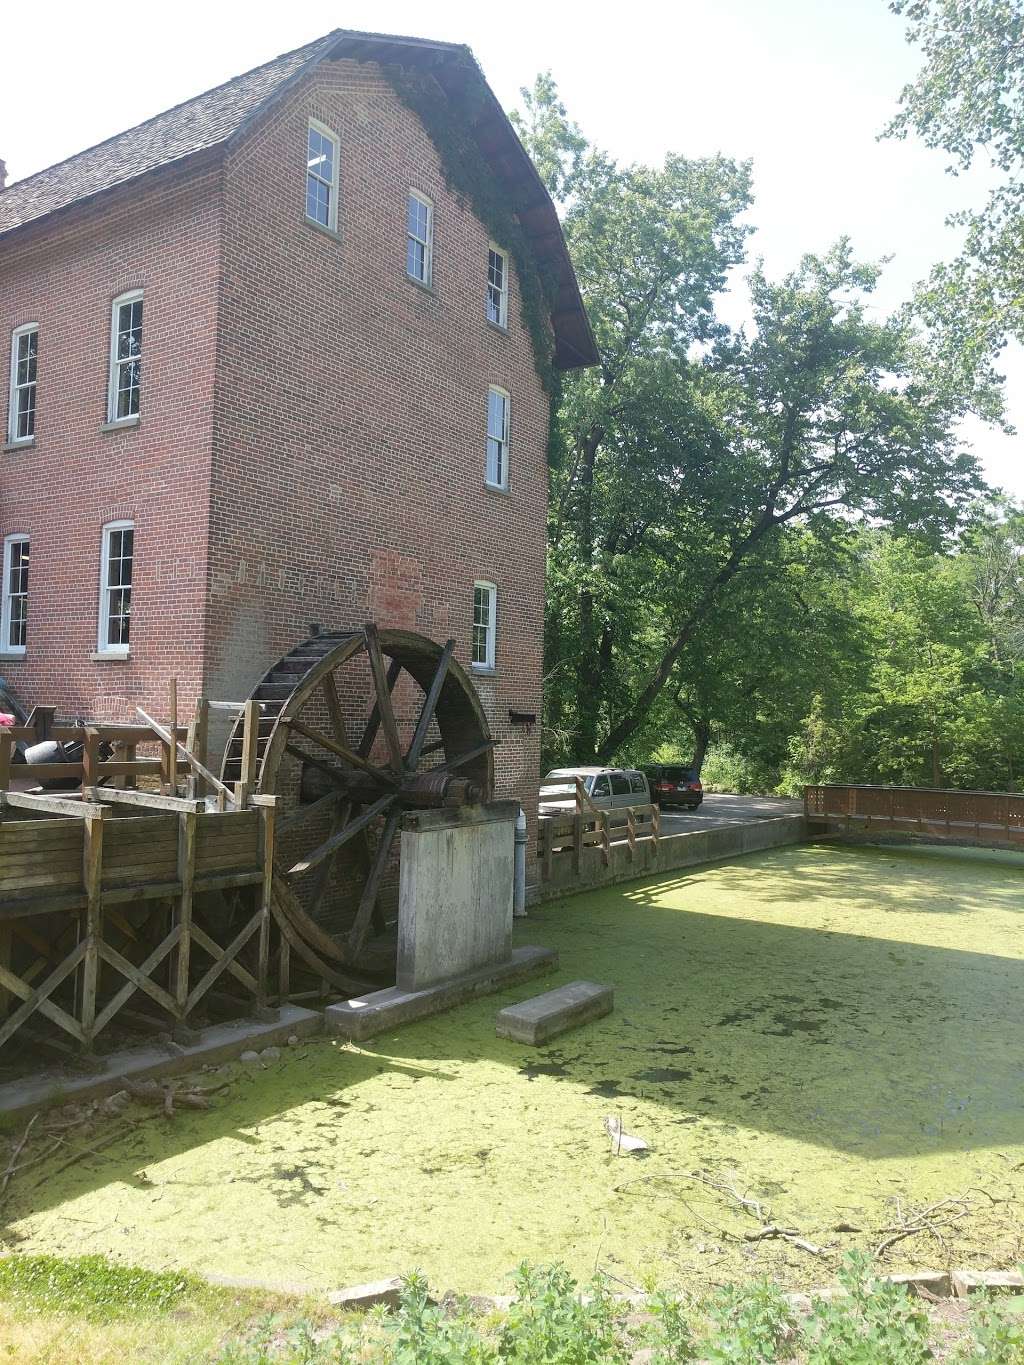 Woods Historic Grist Mill | 9410 Old Lincoln Hwy, Hobart, IN 46342 | Phone: (219) 947-1958